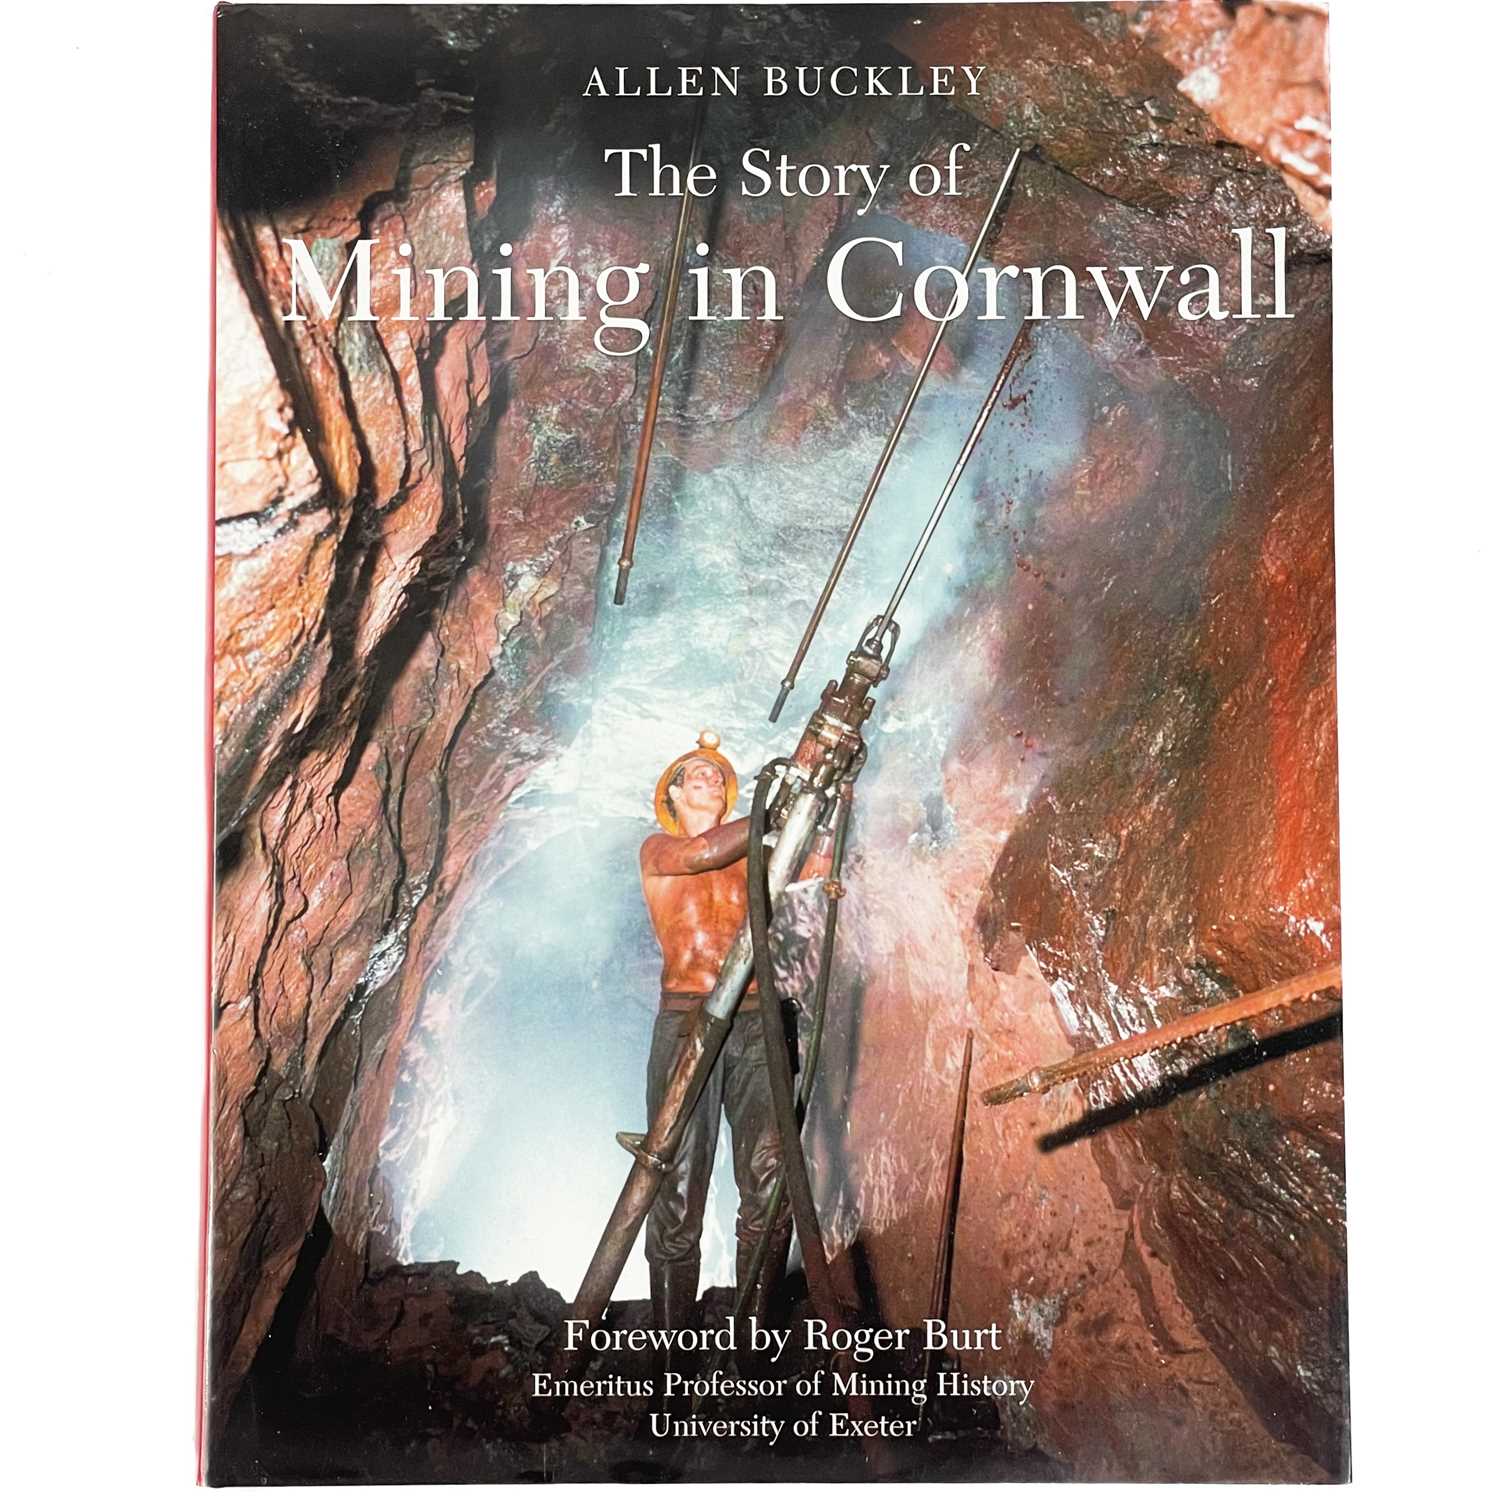 Lot 46 - Allen Buckley. 'The Story of Mining in Cornwall'.